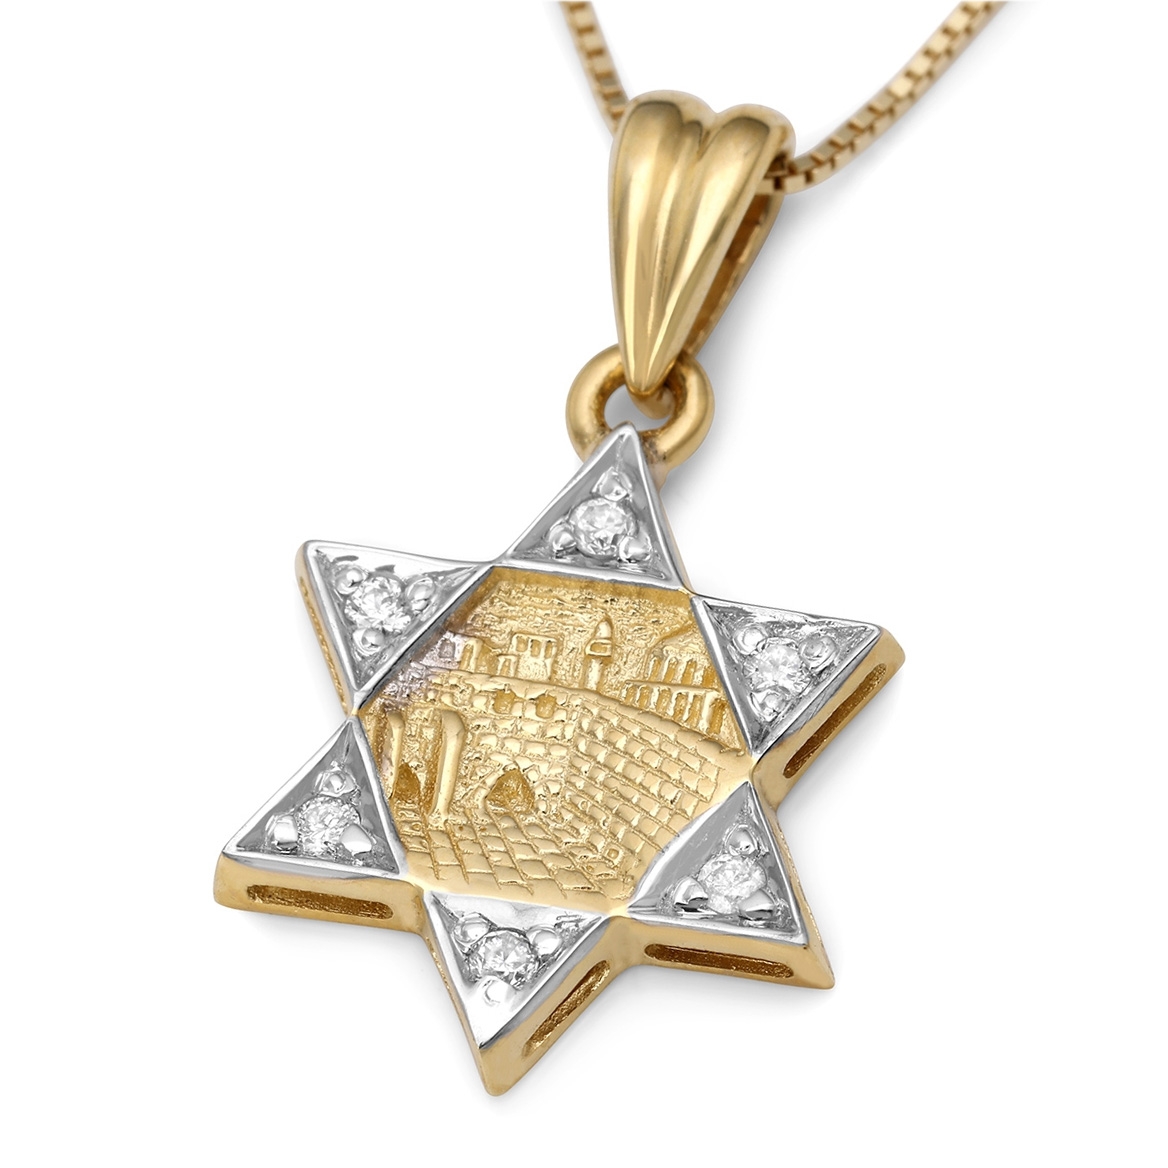 Deluxe 14K Gold and Diamonds Star of David with Old Jerusalem Motif Pendant Necklace  - 1